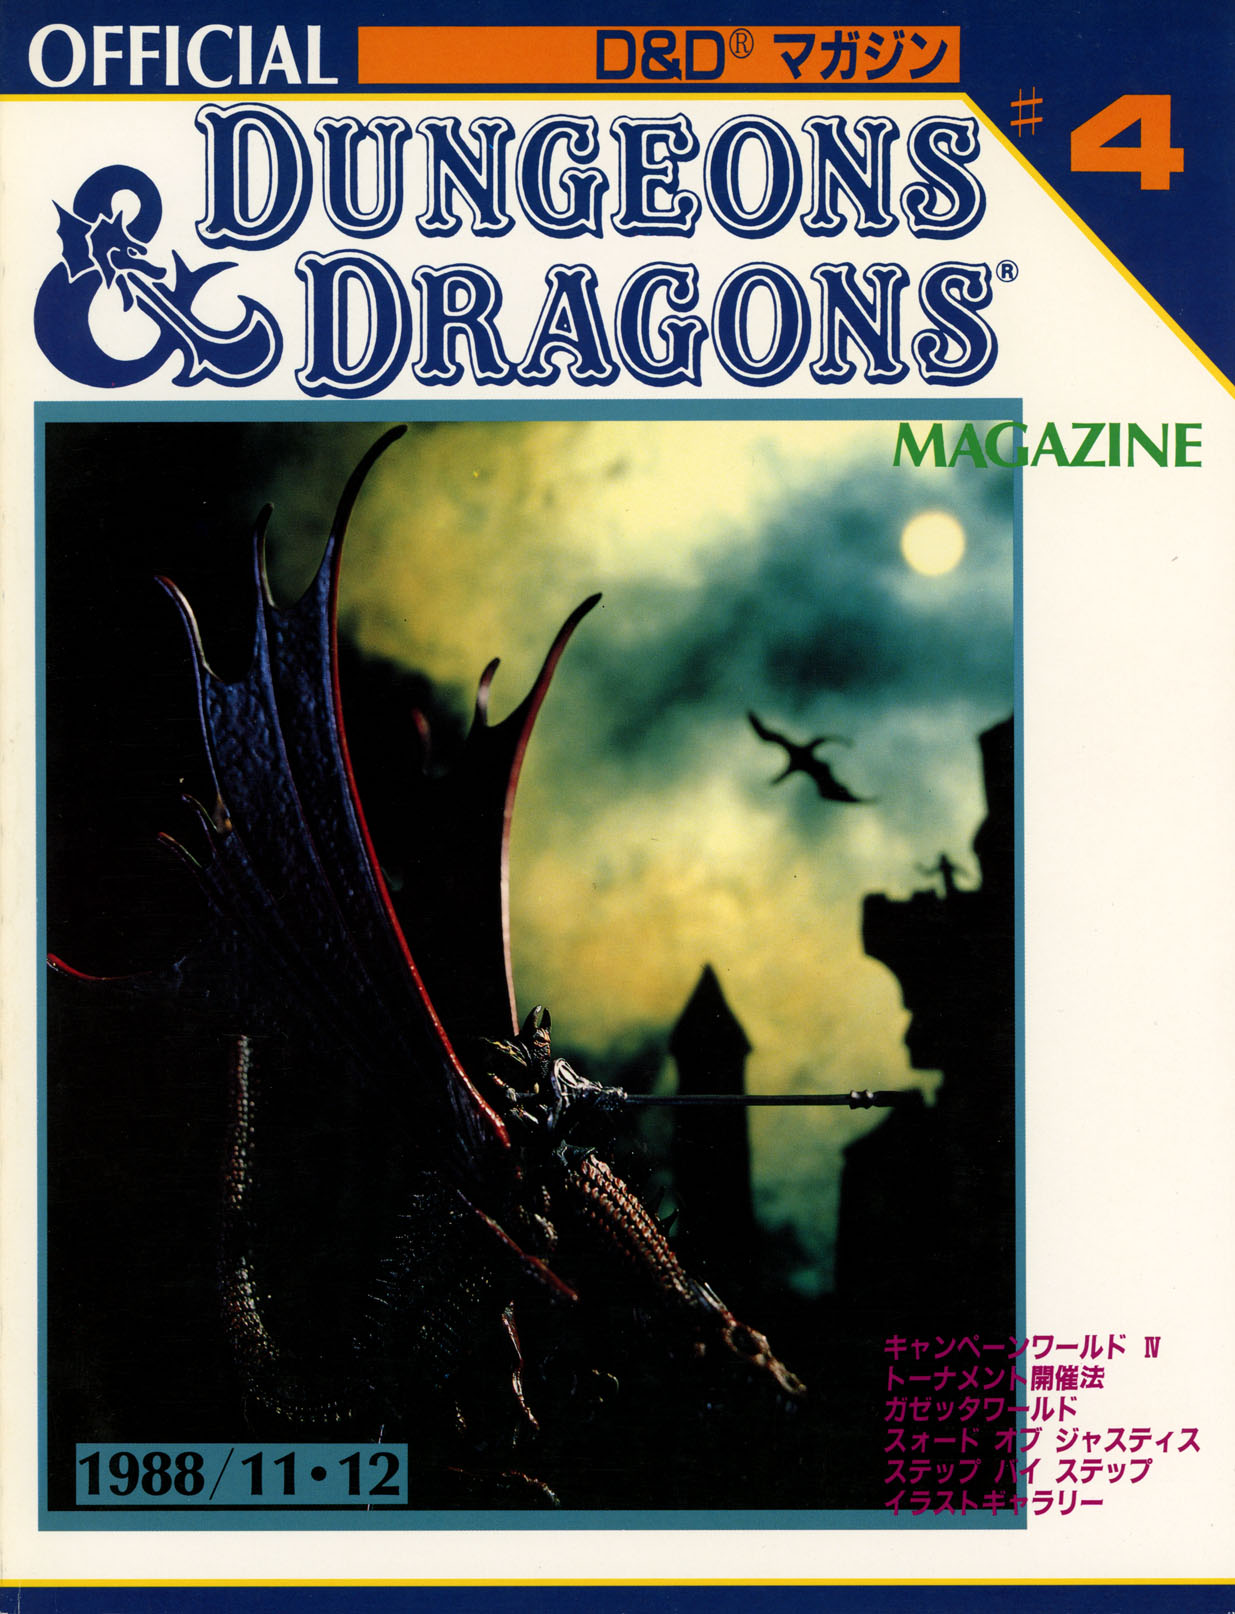 Japanese Dungeons & Dragons Archive